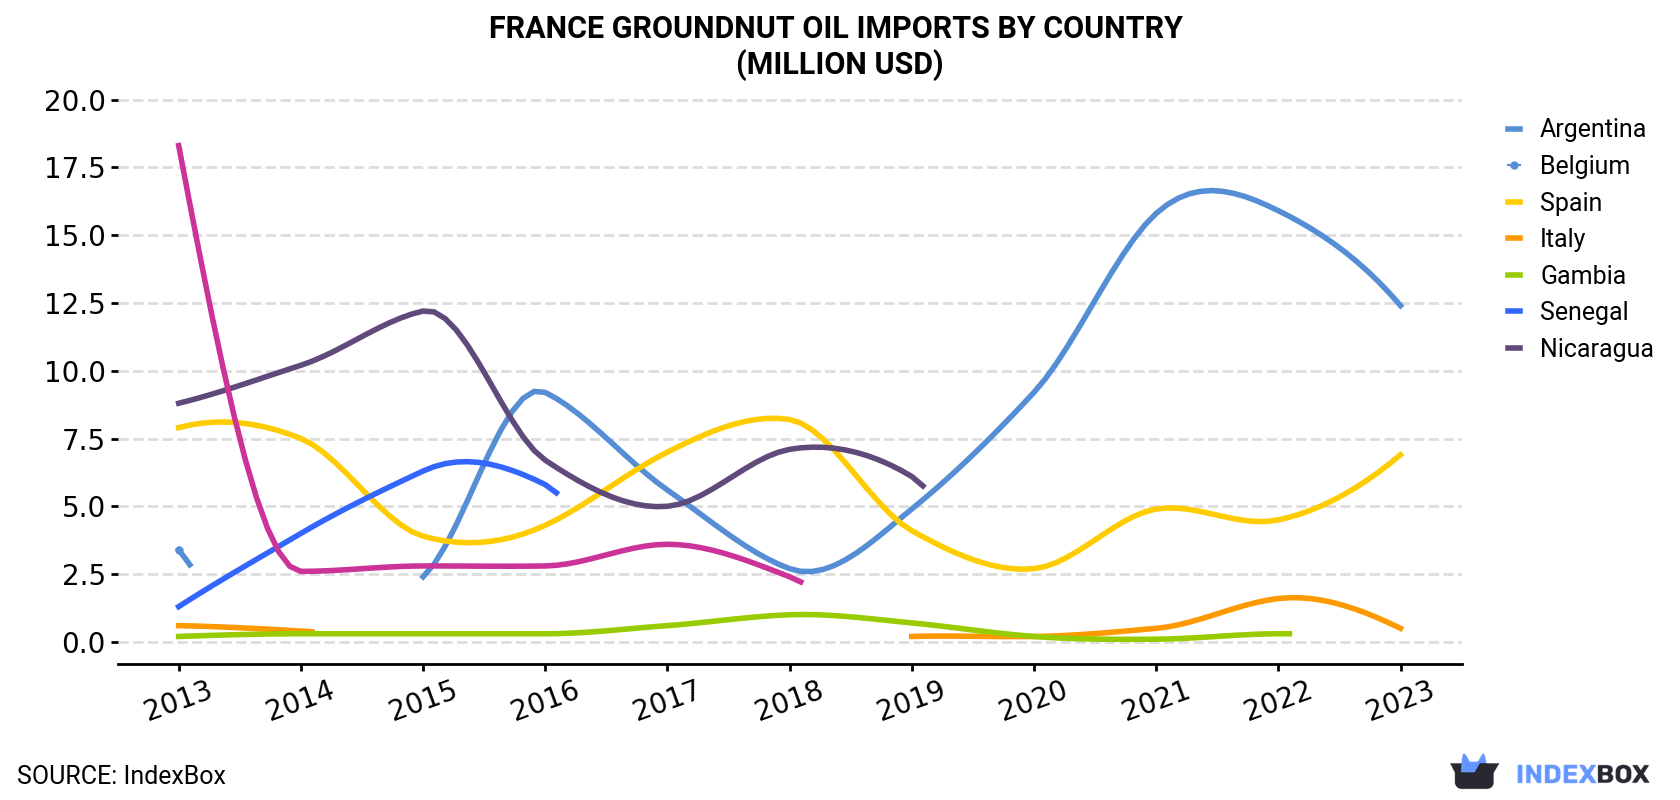 France Groundnut Oil Imports By Country (Million USD)